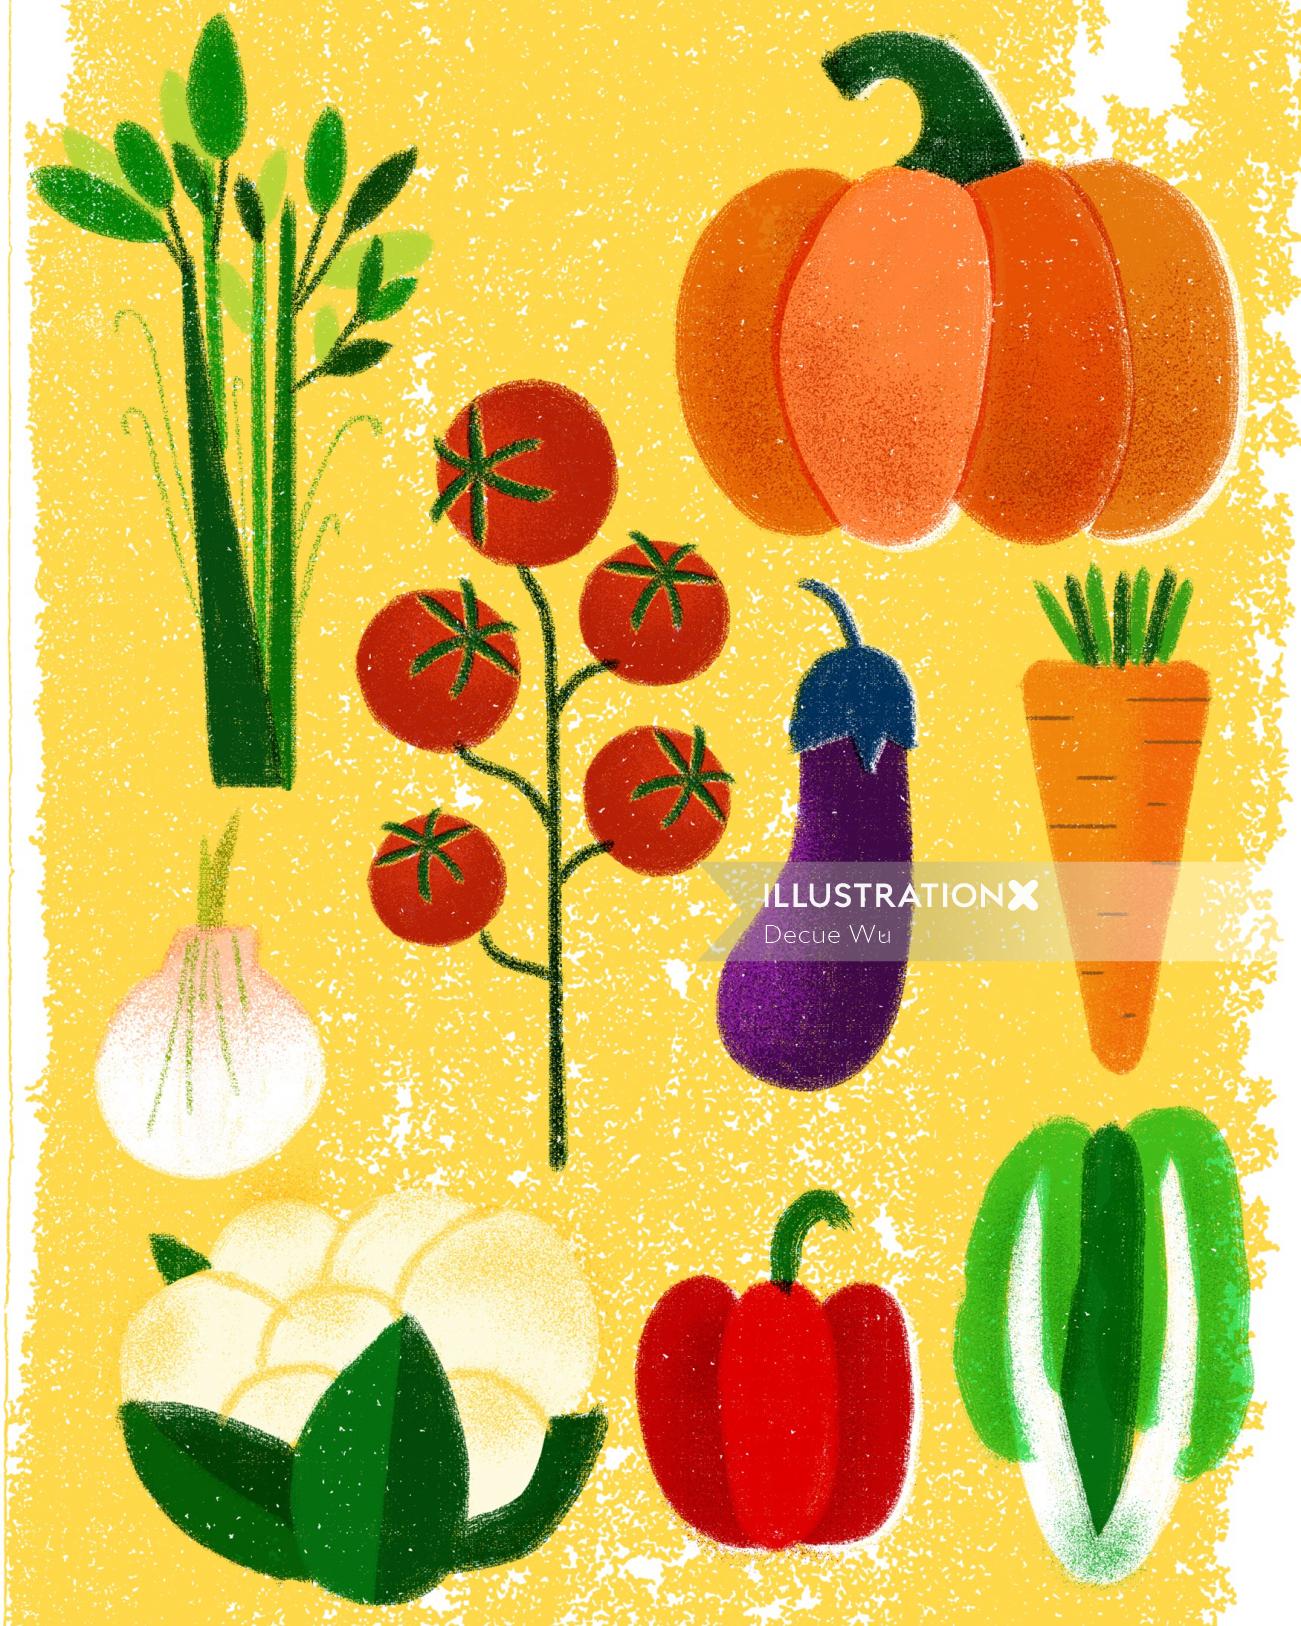 Editorial illustration of vegetables for Vogue China March